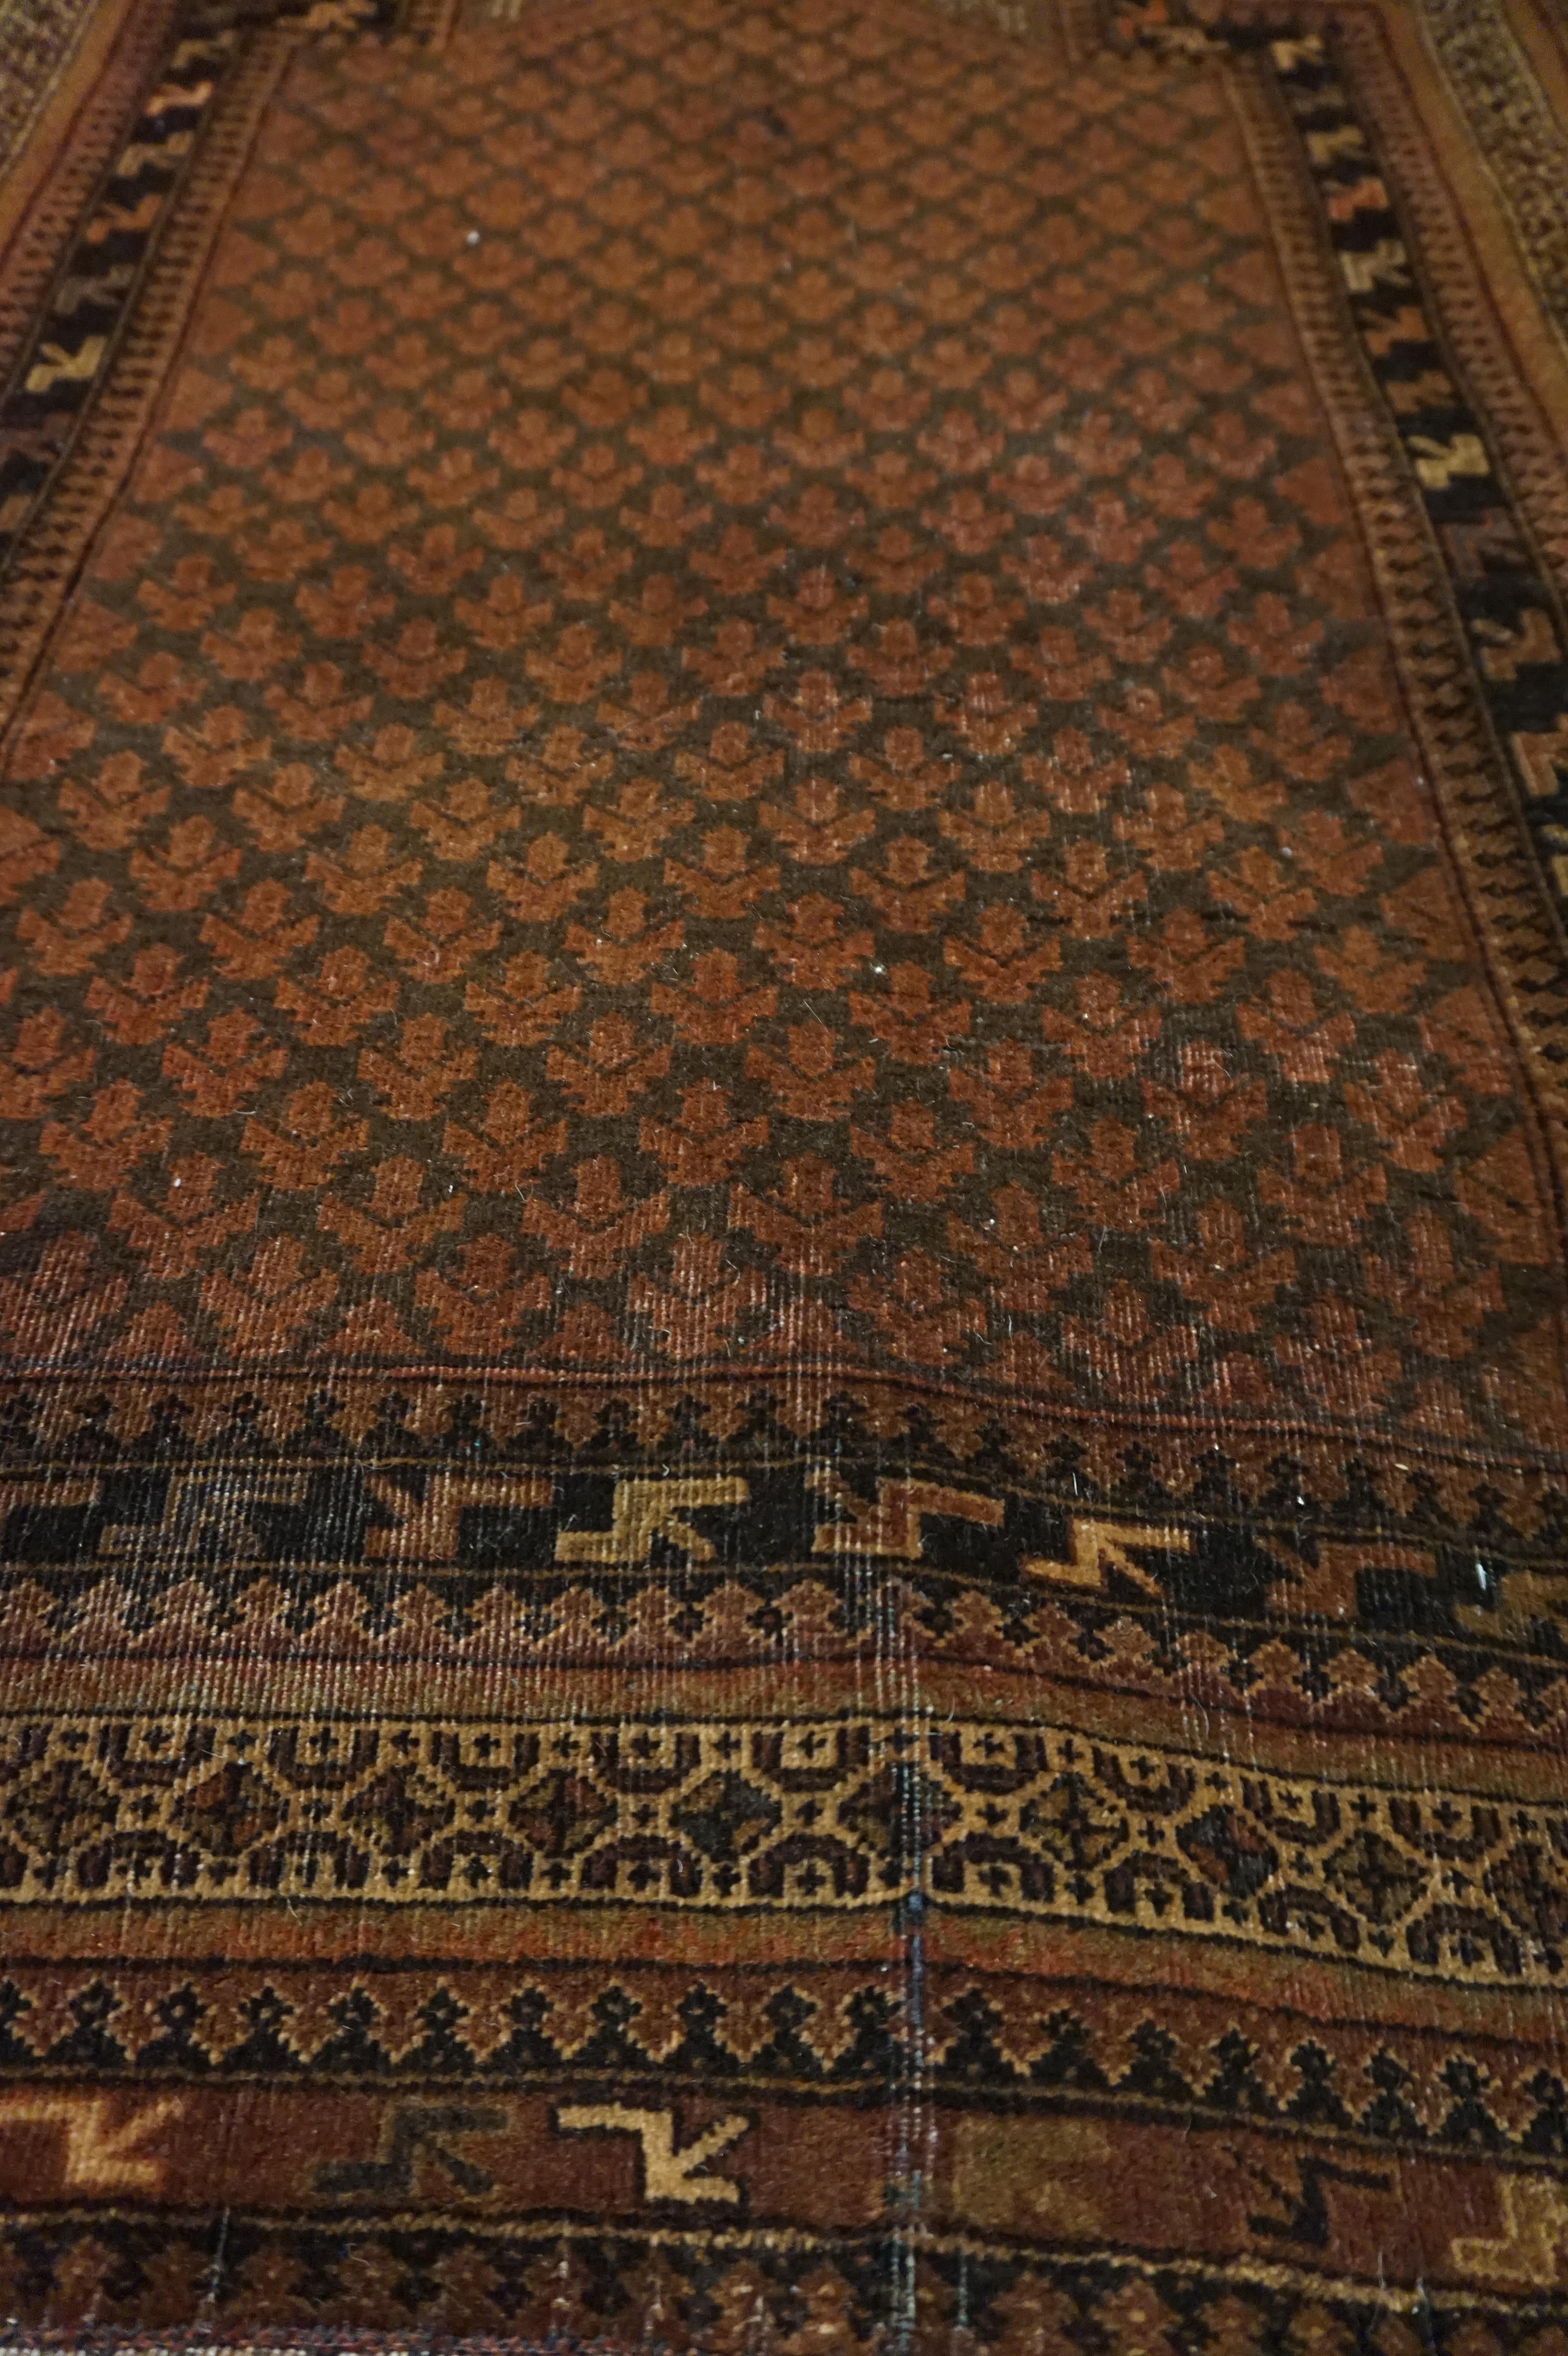 Fine Antique Afghan Hand-Knotted Wool Prayer Rug in Muted Brown Tones For Sale 4